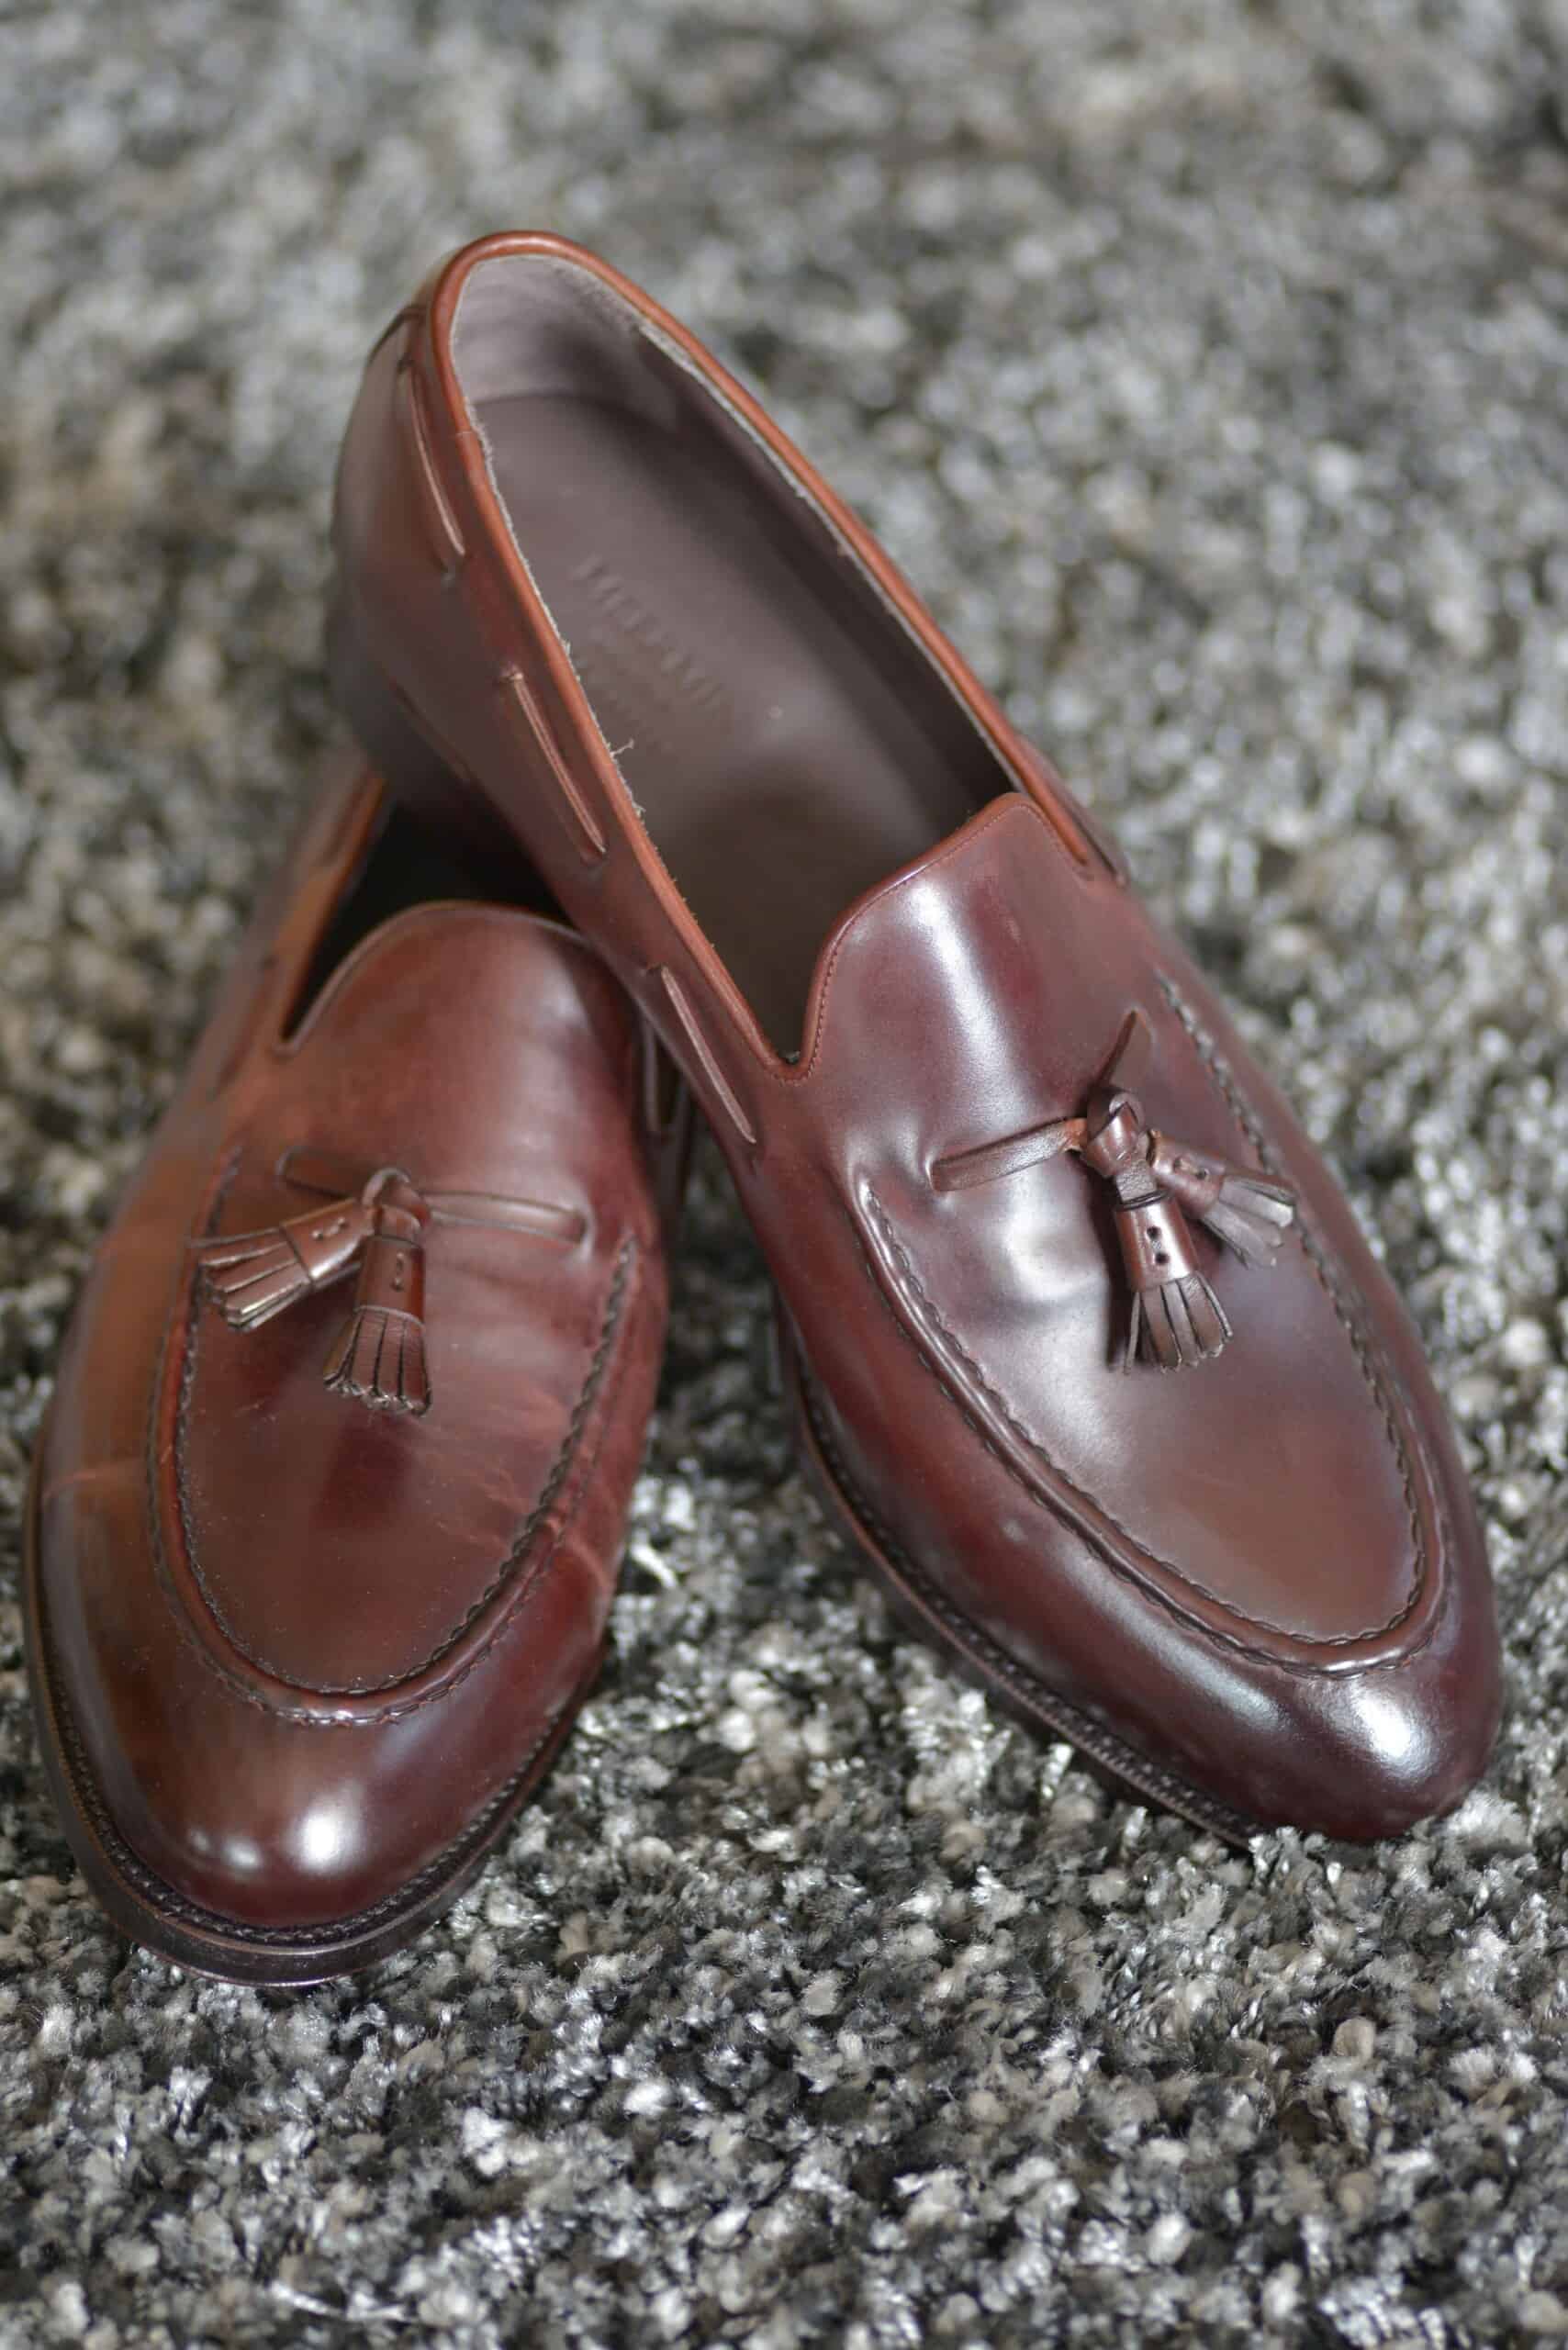 A pair of cordovan leather tassel loafers